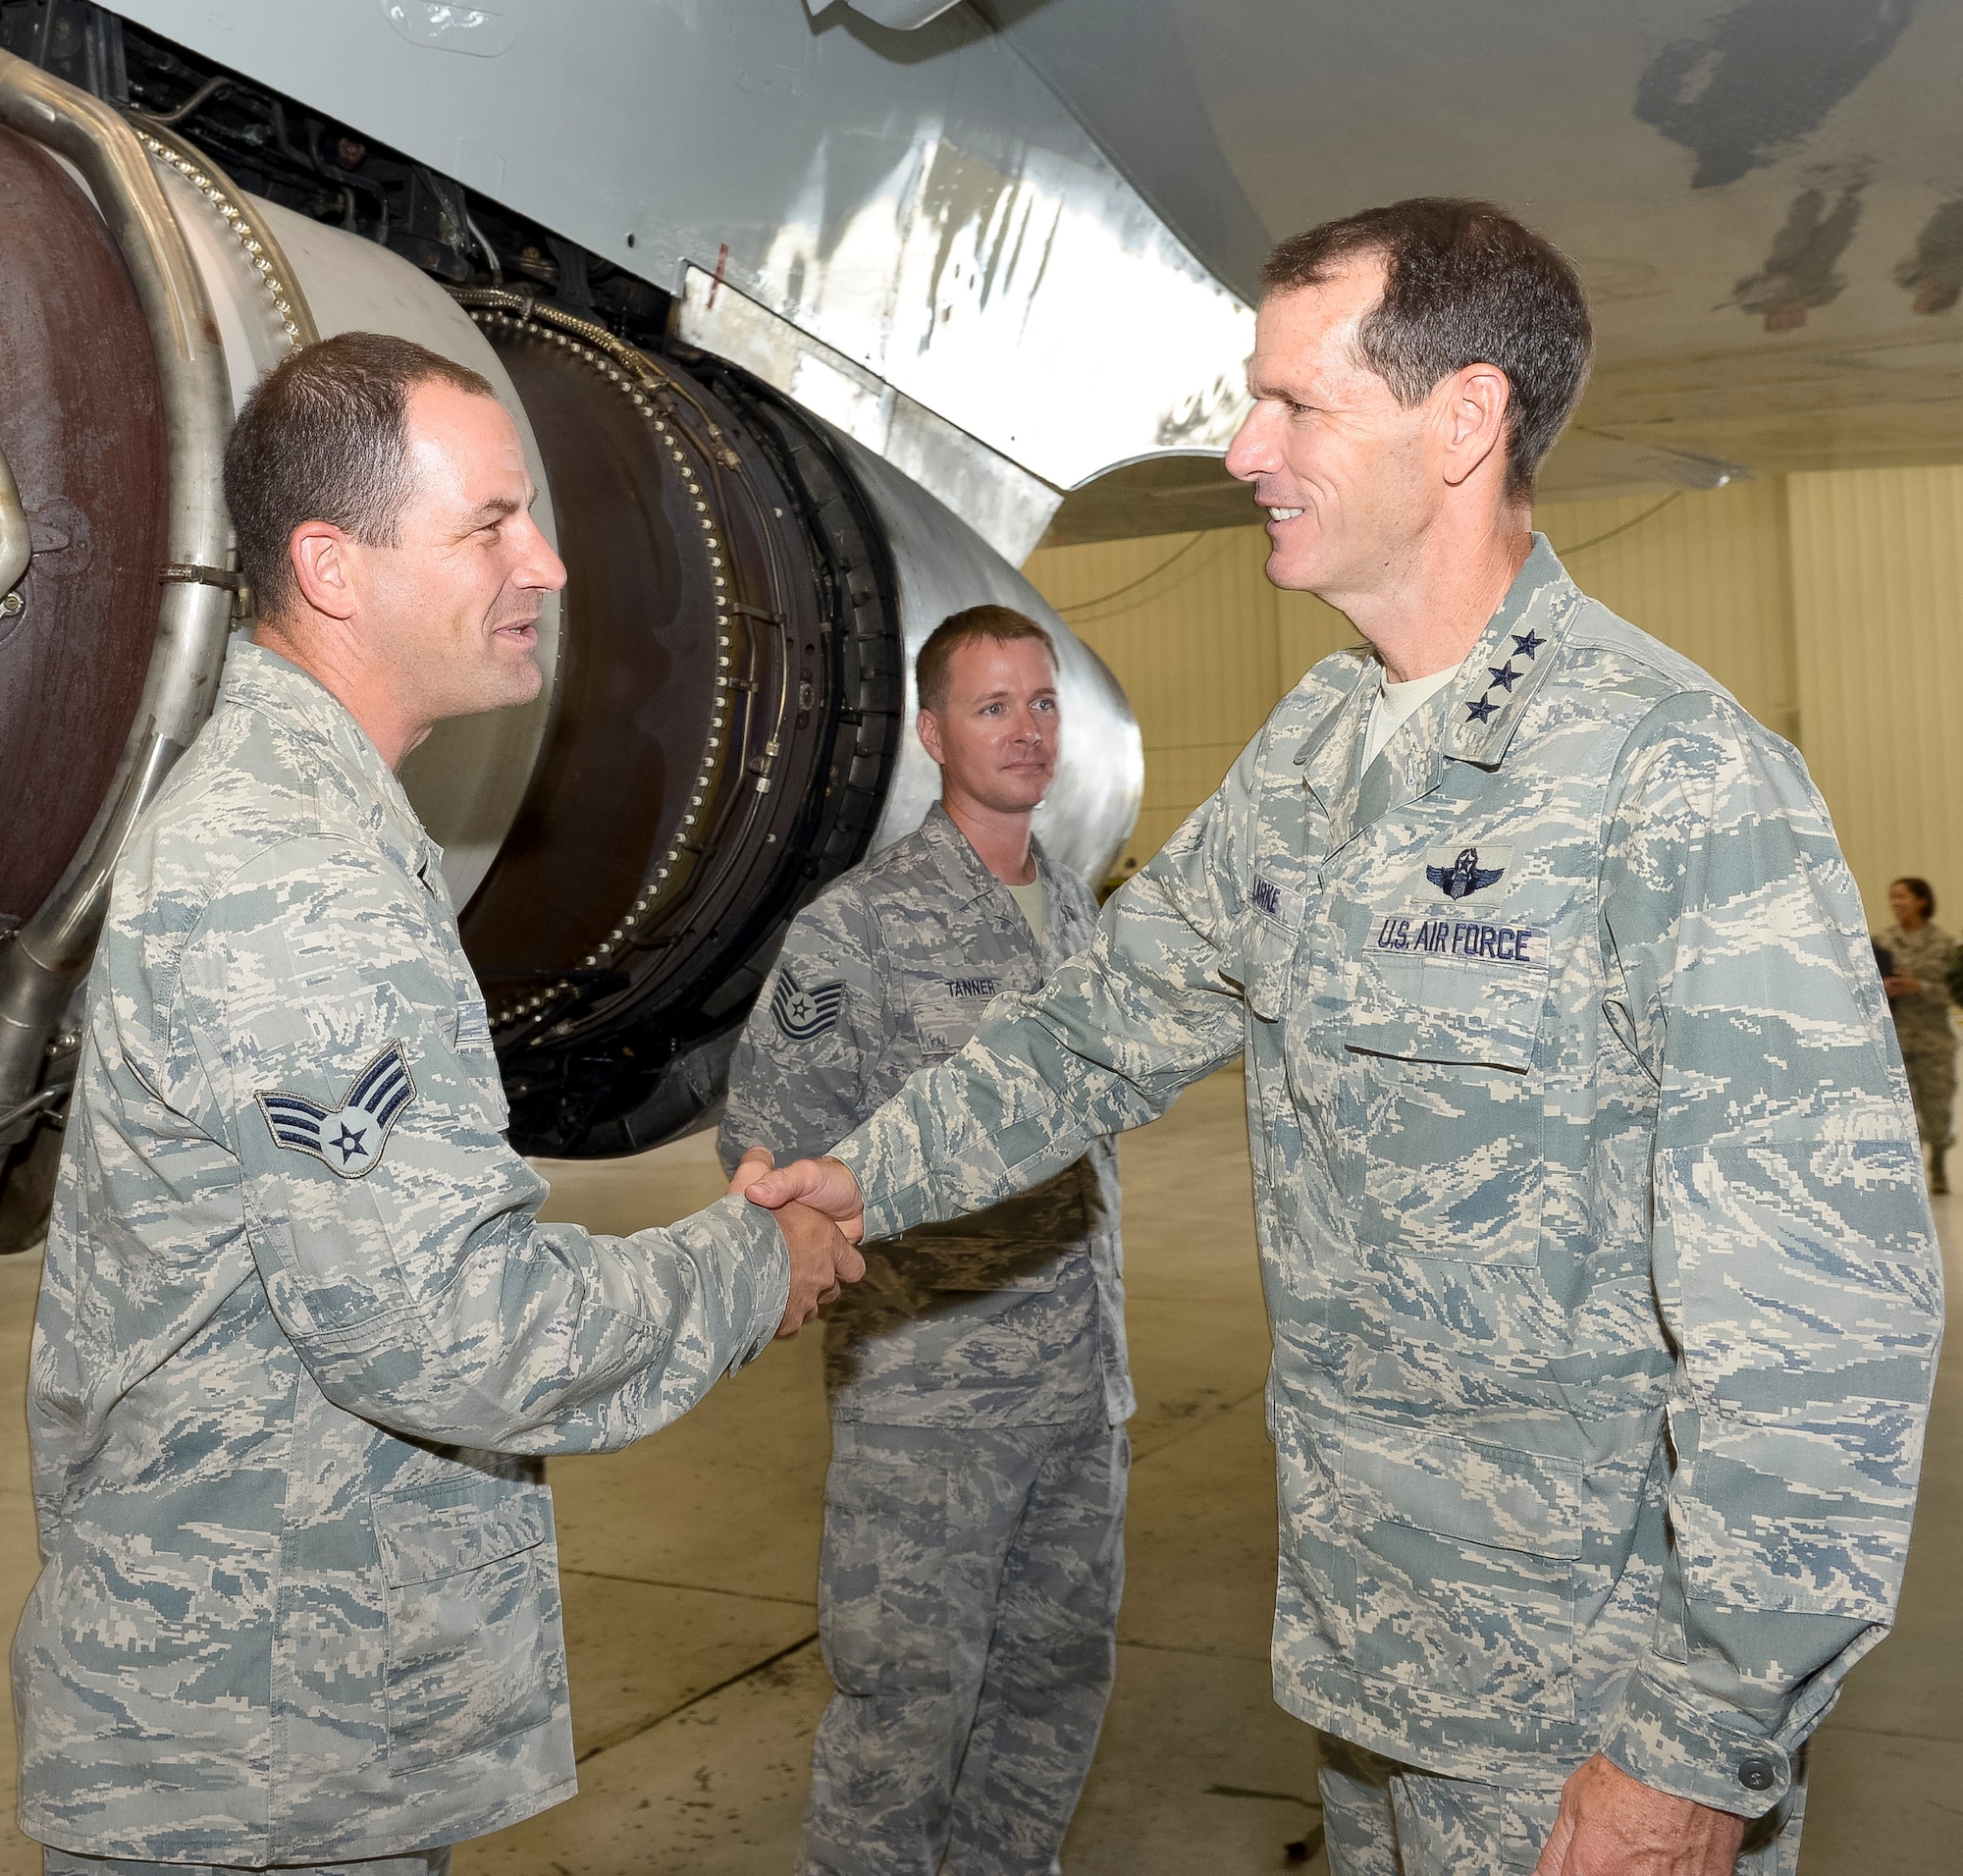 Lt. Gen. Stanley E. Clarke III, director of the Air National Guard, greets Senior Airman Jason Sabaka, 116th Maintenance Squadron, during an orientation visit to the 116th and 461st Air Control Wings at Robins Air Force Base, Ga., July 3, 2013.  The visit is Clarke's first to Team JSTARS since becoming director of the Air National Guard.  During the visit Clarke received a mission orientation, toured the E-8C and visited Airmen and Soldiers throughout the unit. (U.S. Air National Guard photo by Master Sgt. Roger Parsons/Released)